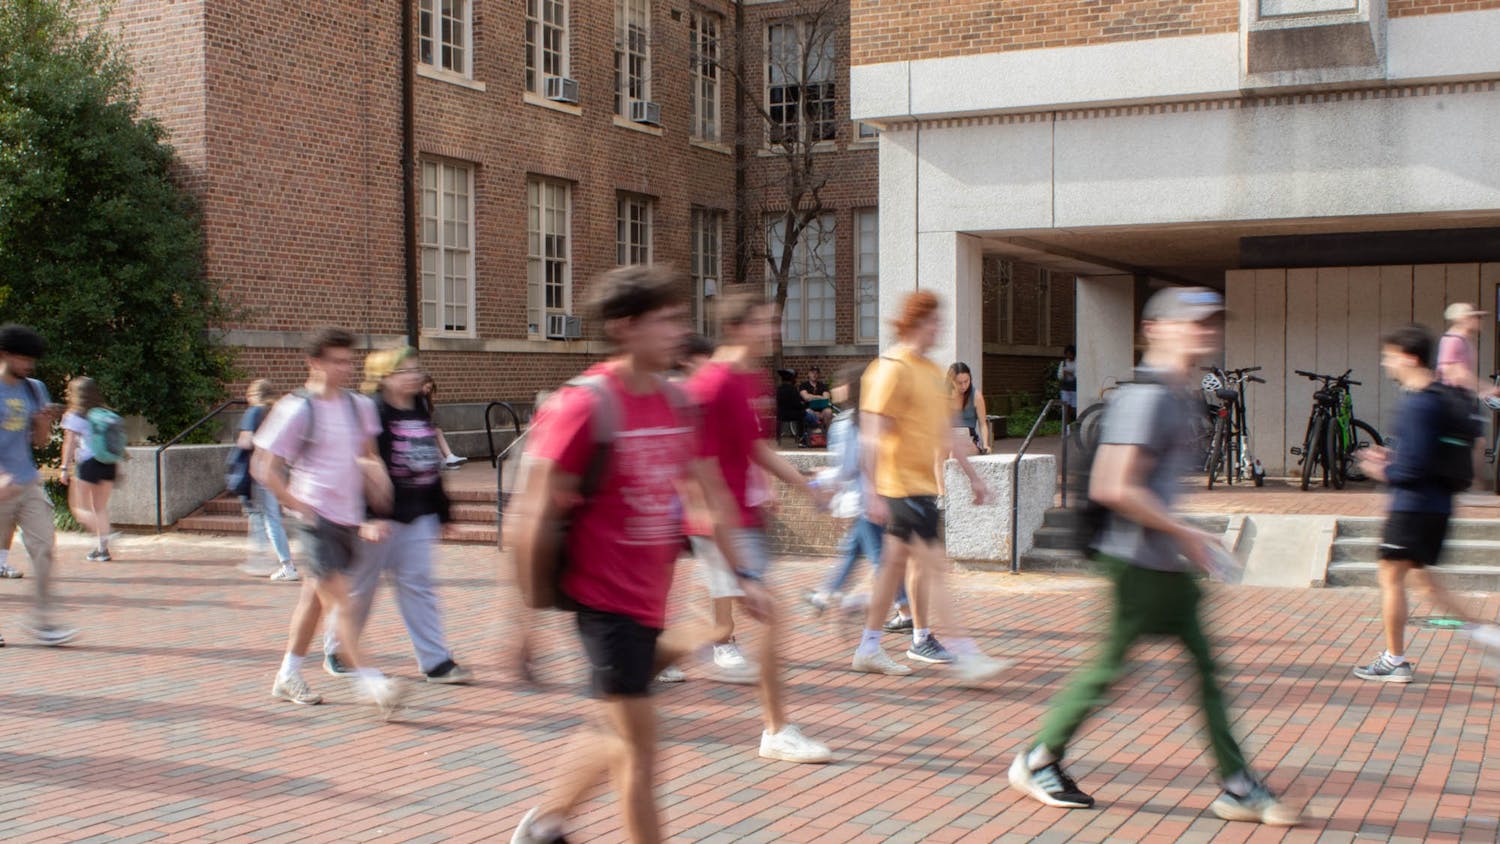 A blur of students traverse the UNC grounds on Monday, March 6, 2022.